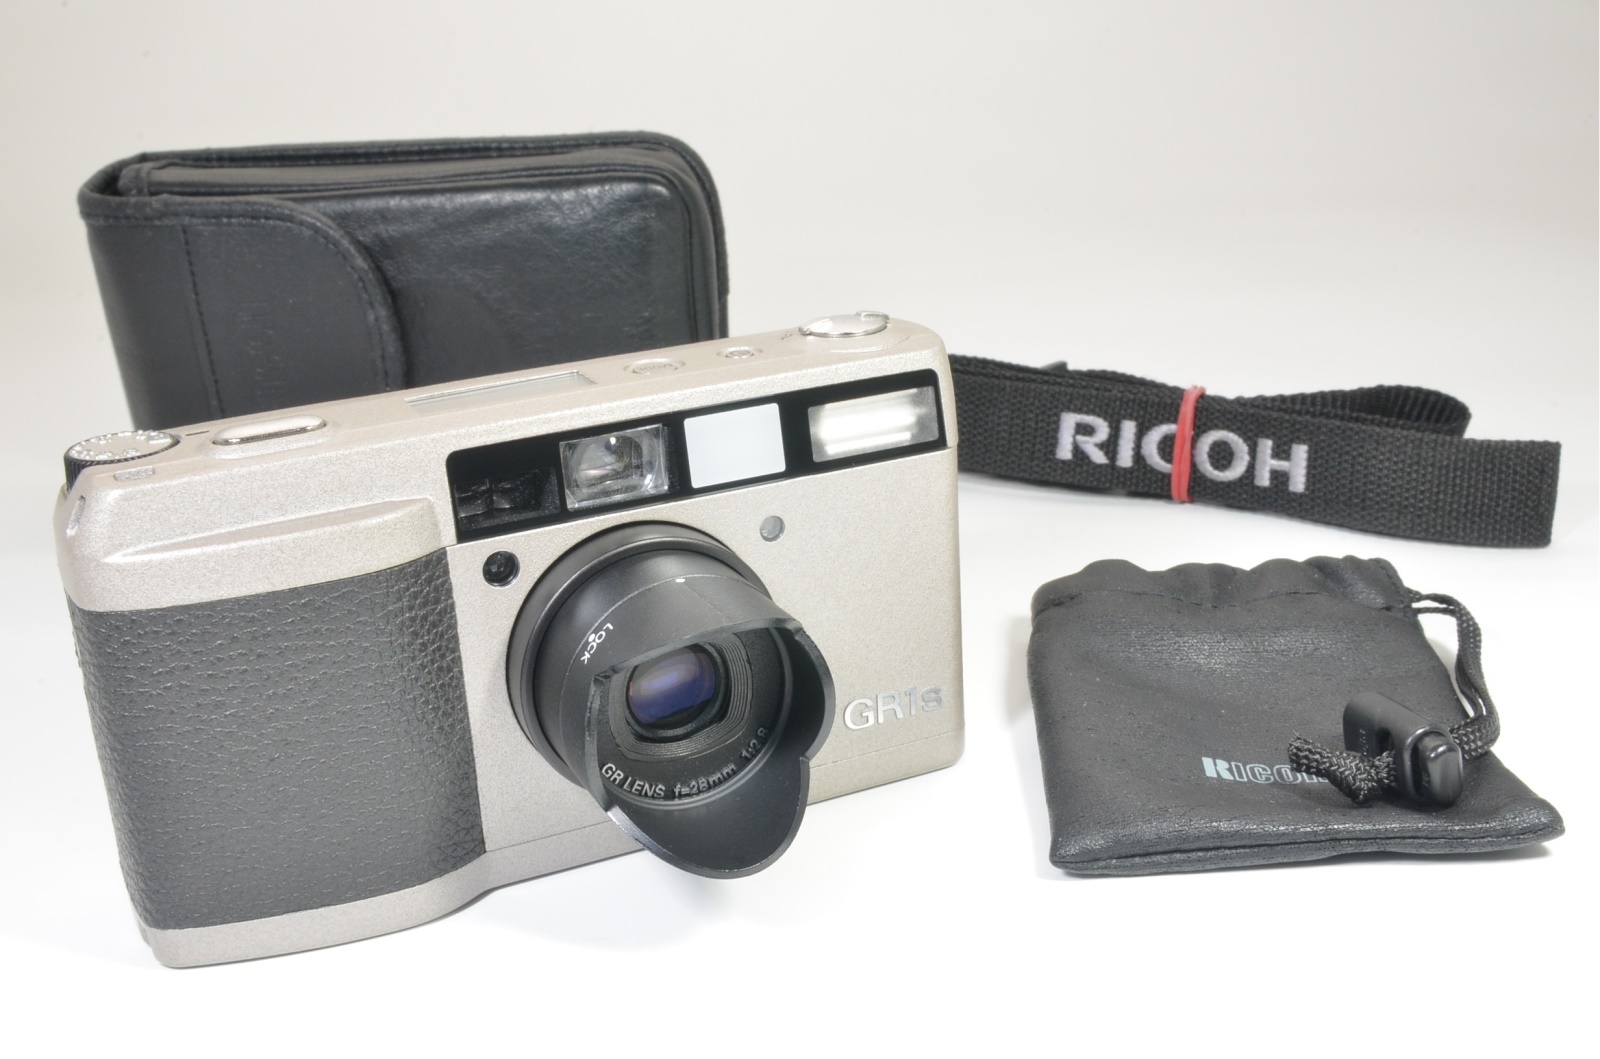 ricoh gr1s date silver 28mm f2.8 p&s film camera from japan shooting tested